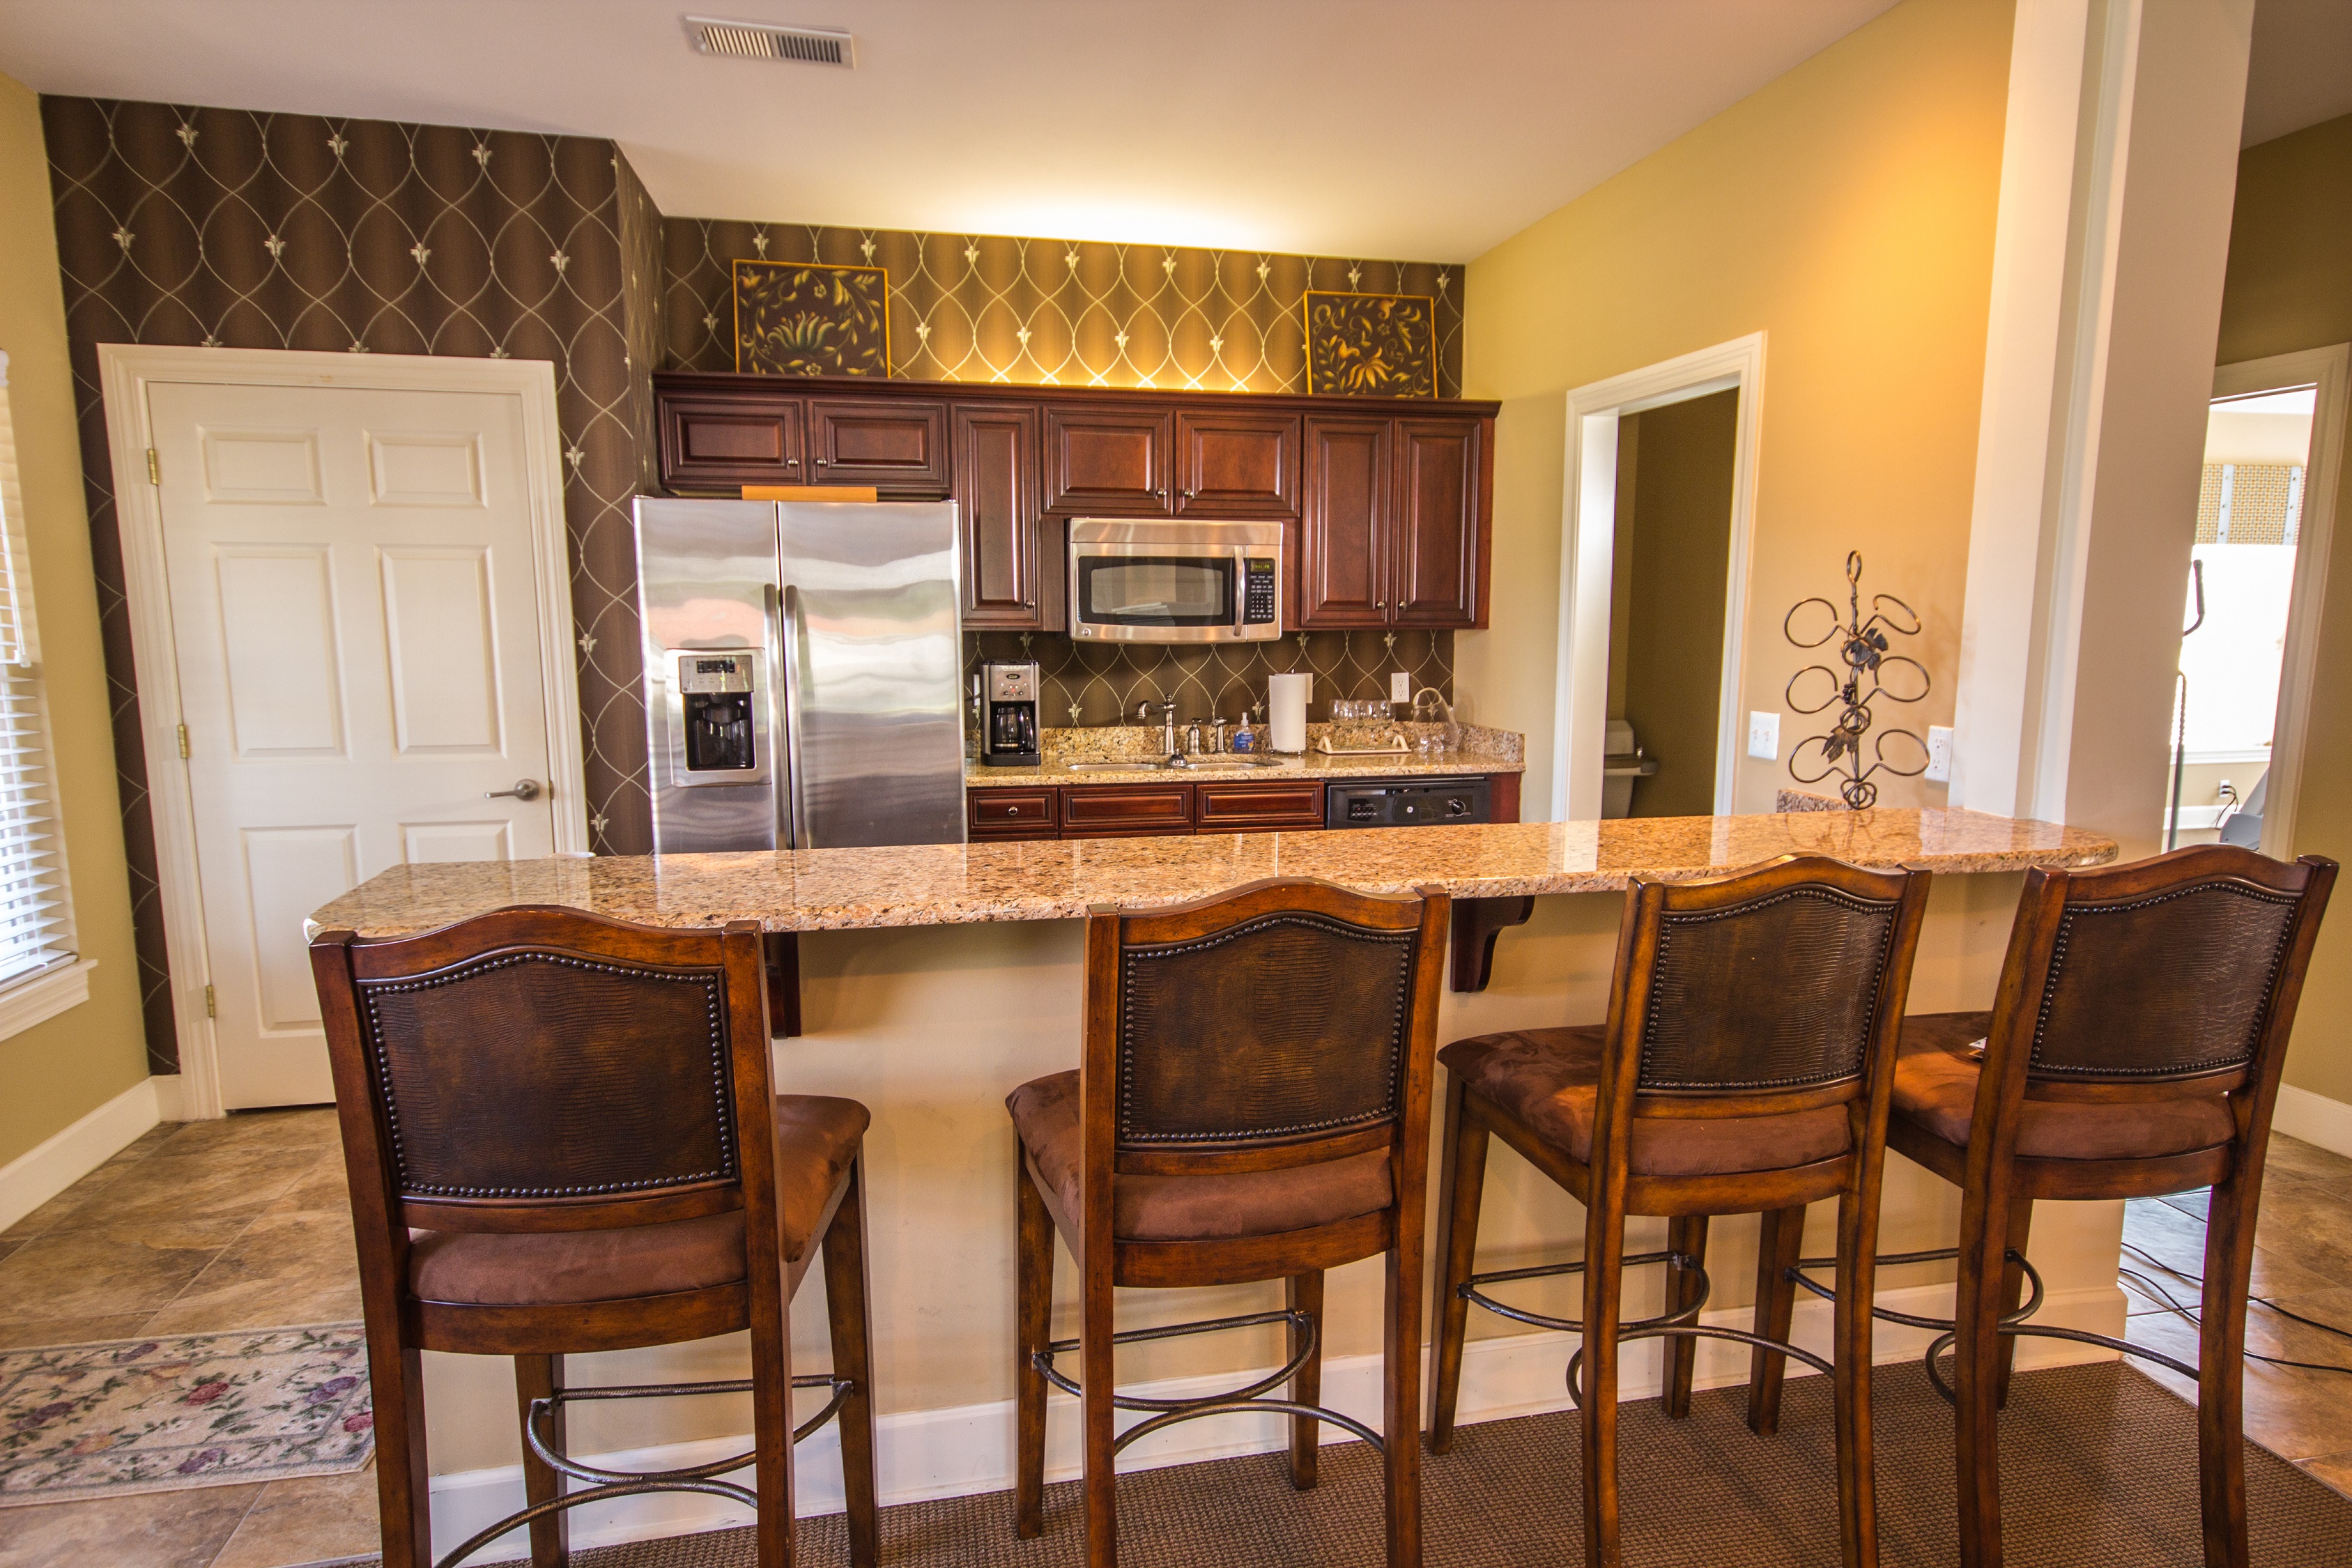 A full kitchen in the clubhouse is a big convenience hosting events and parties